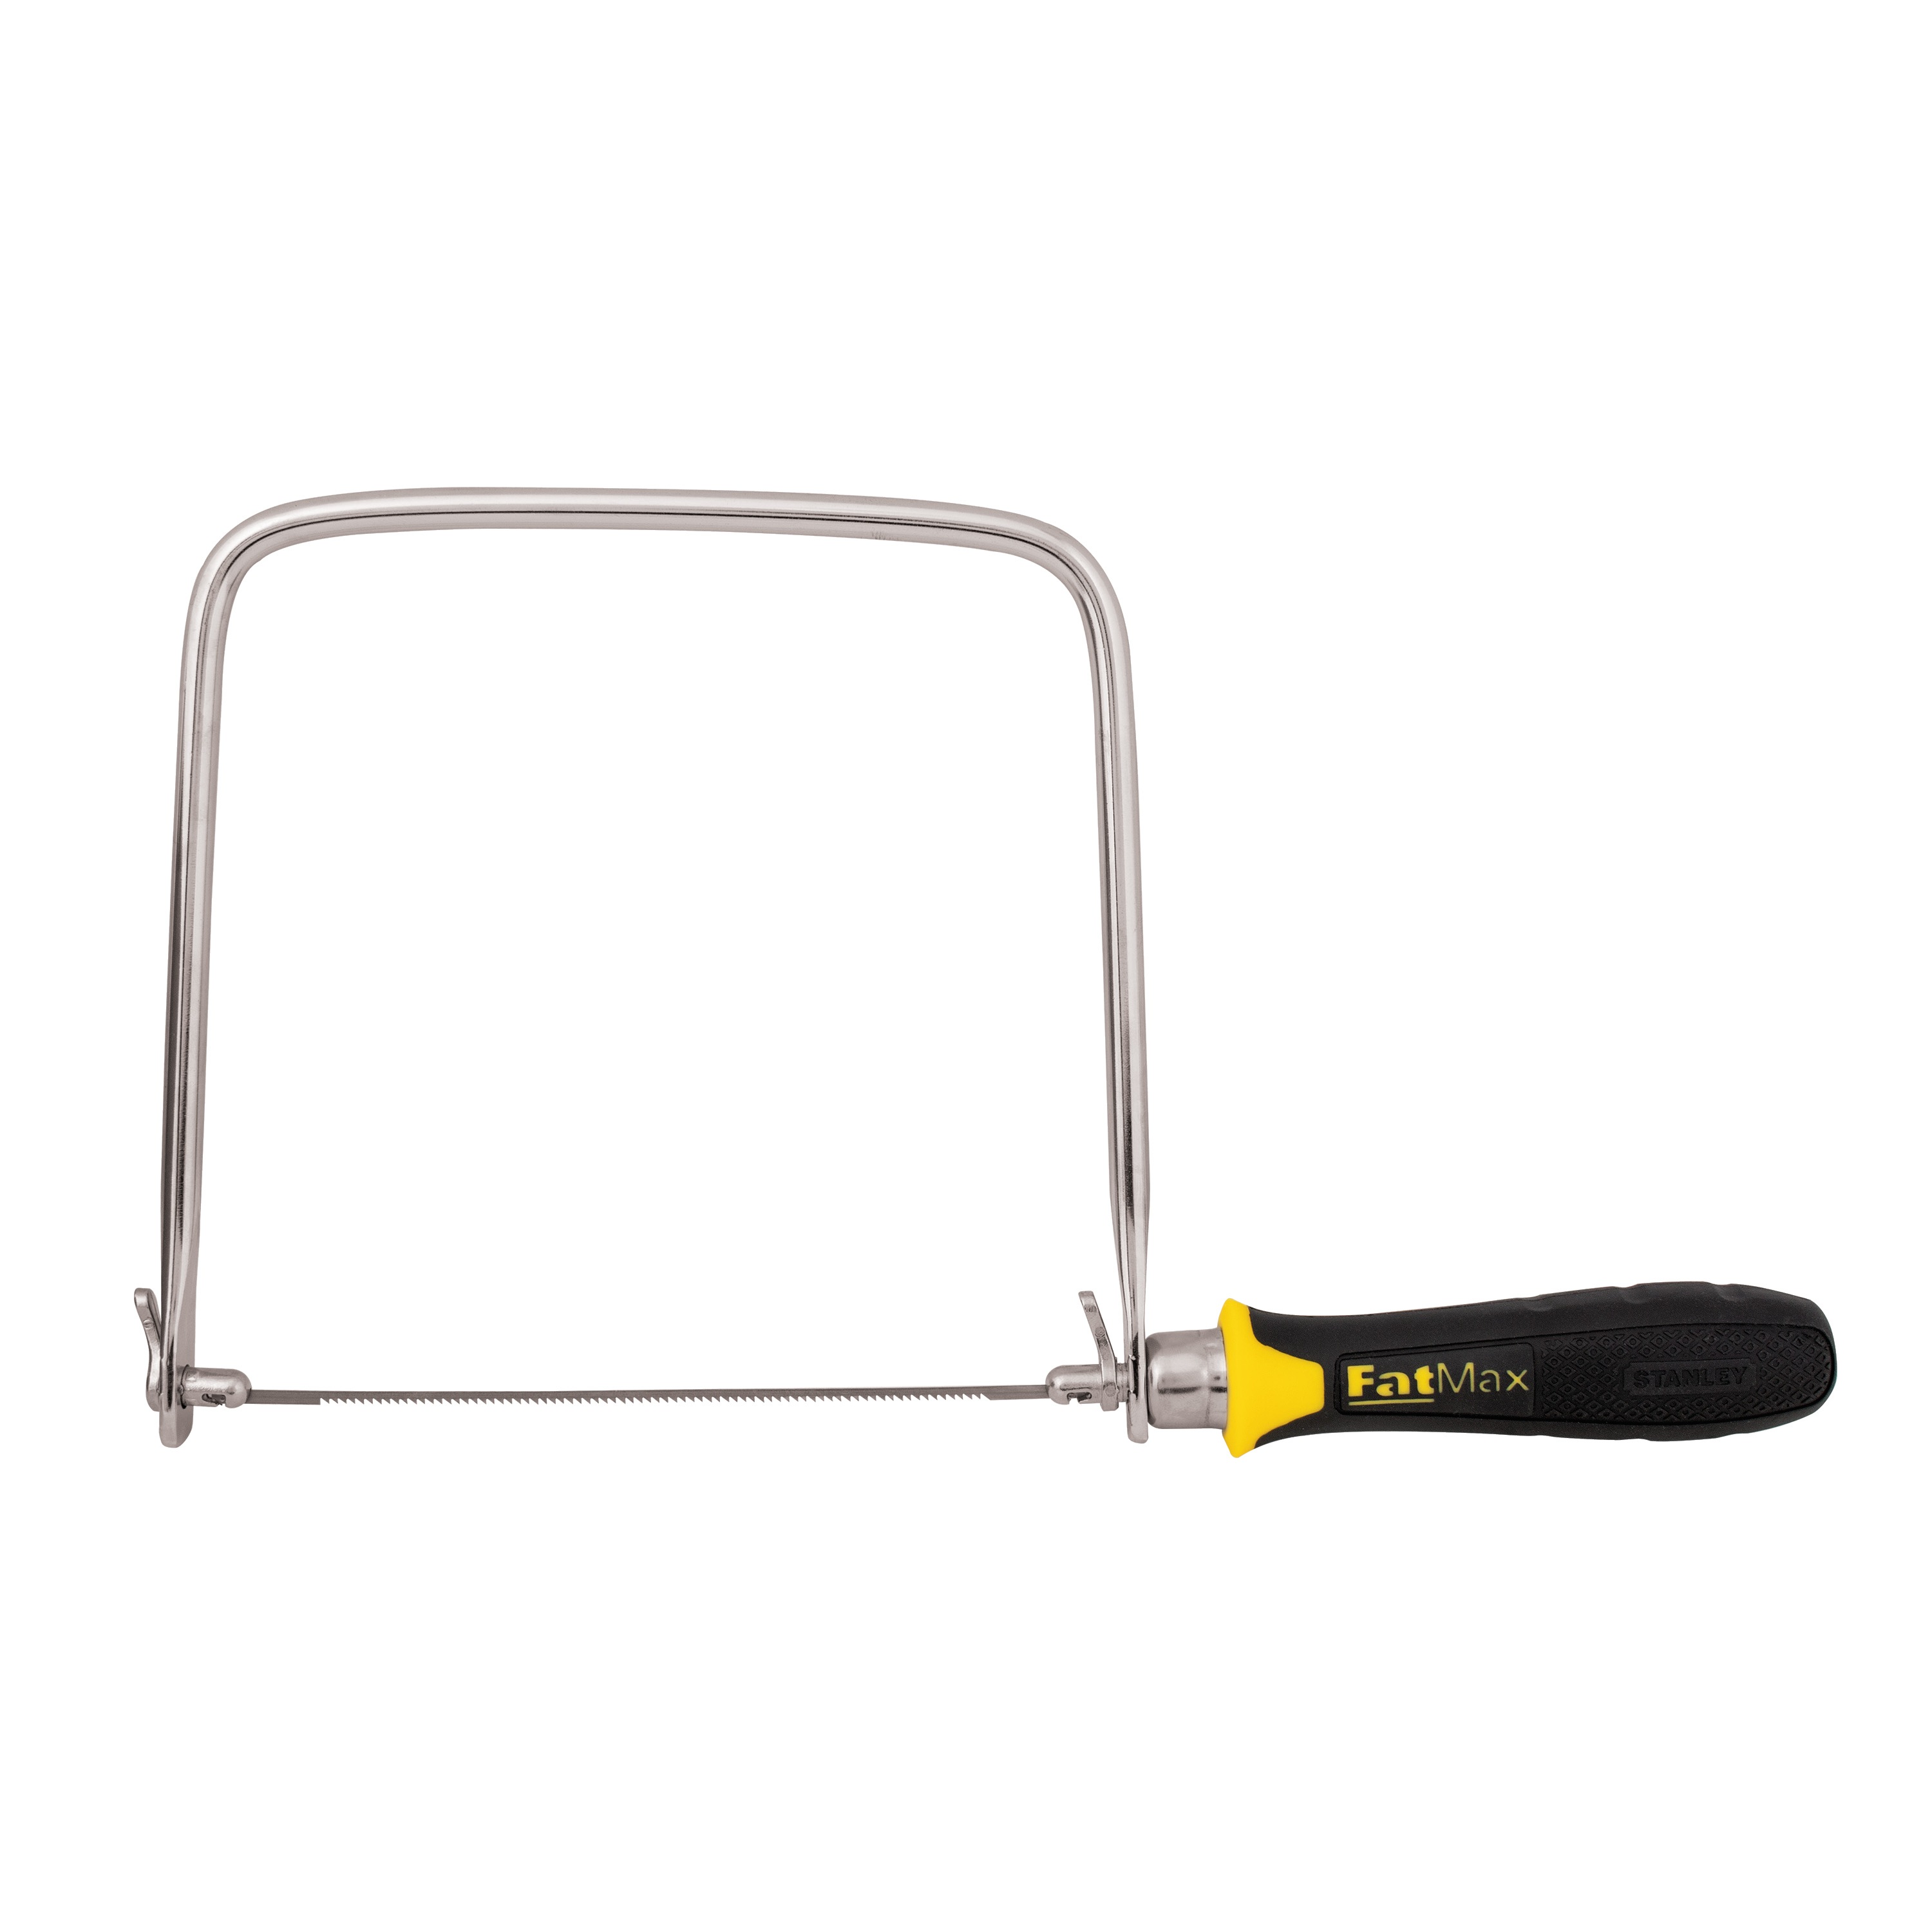 Stanley Tools - 634 in FATMAX Coping Saw - 15-106